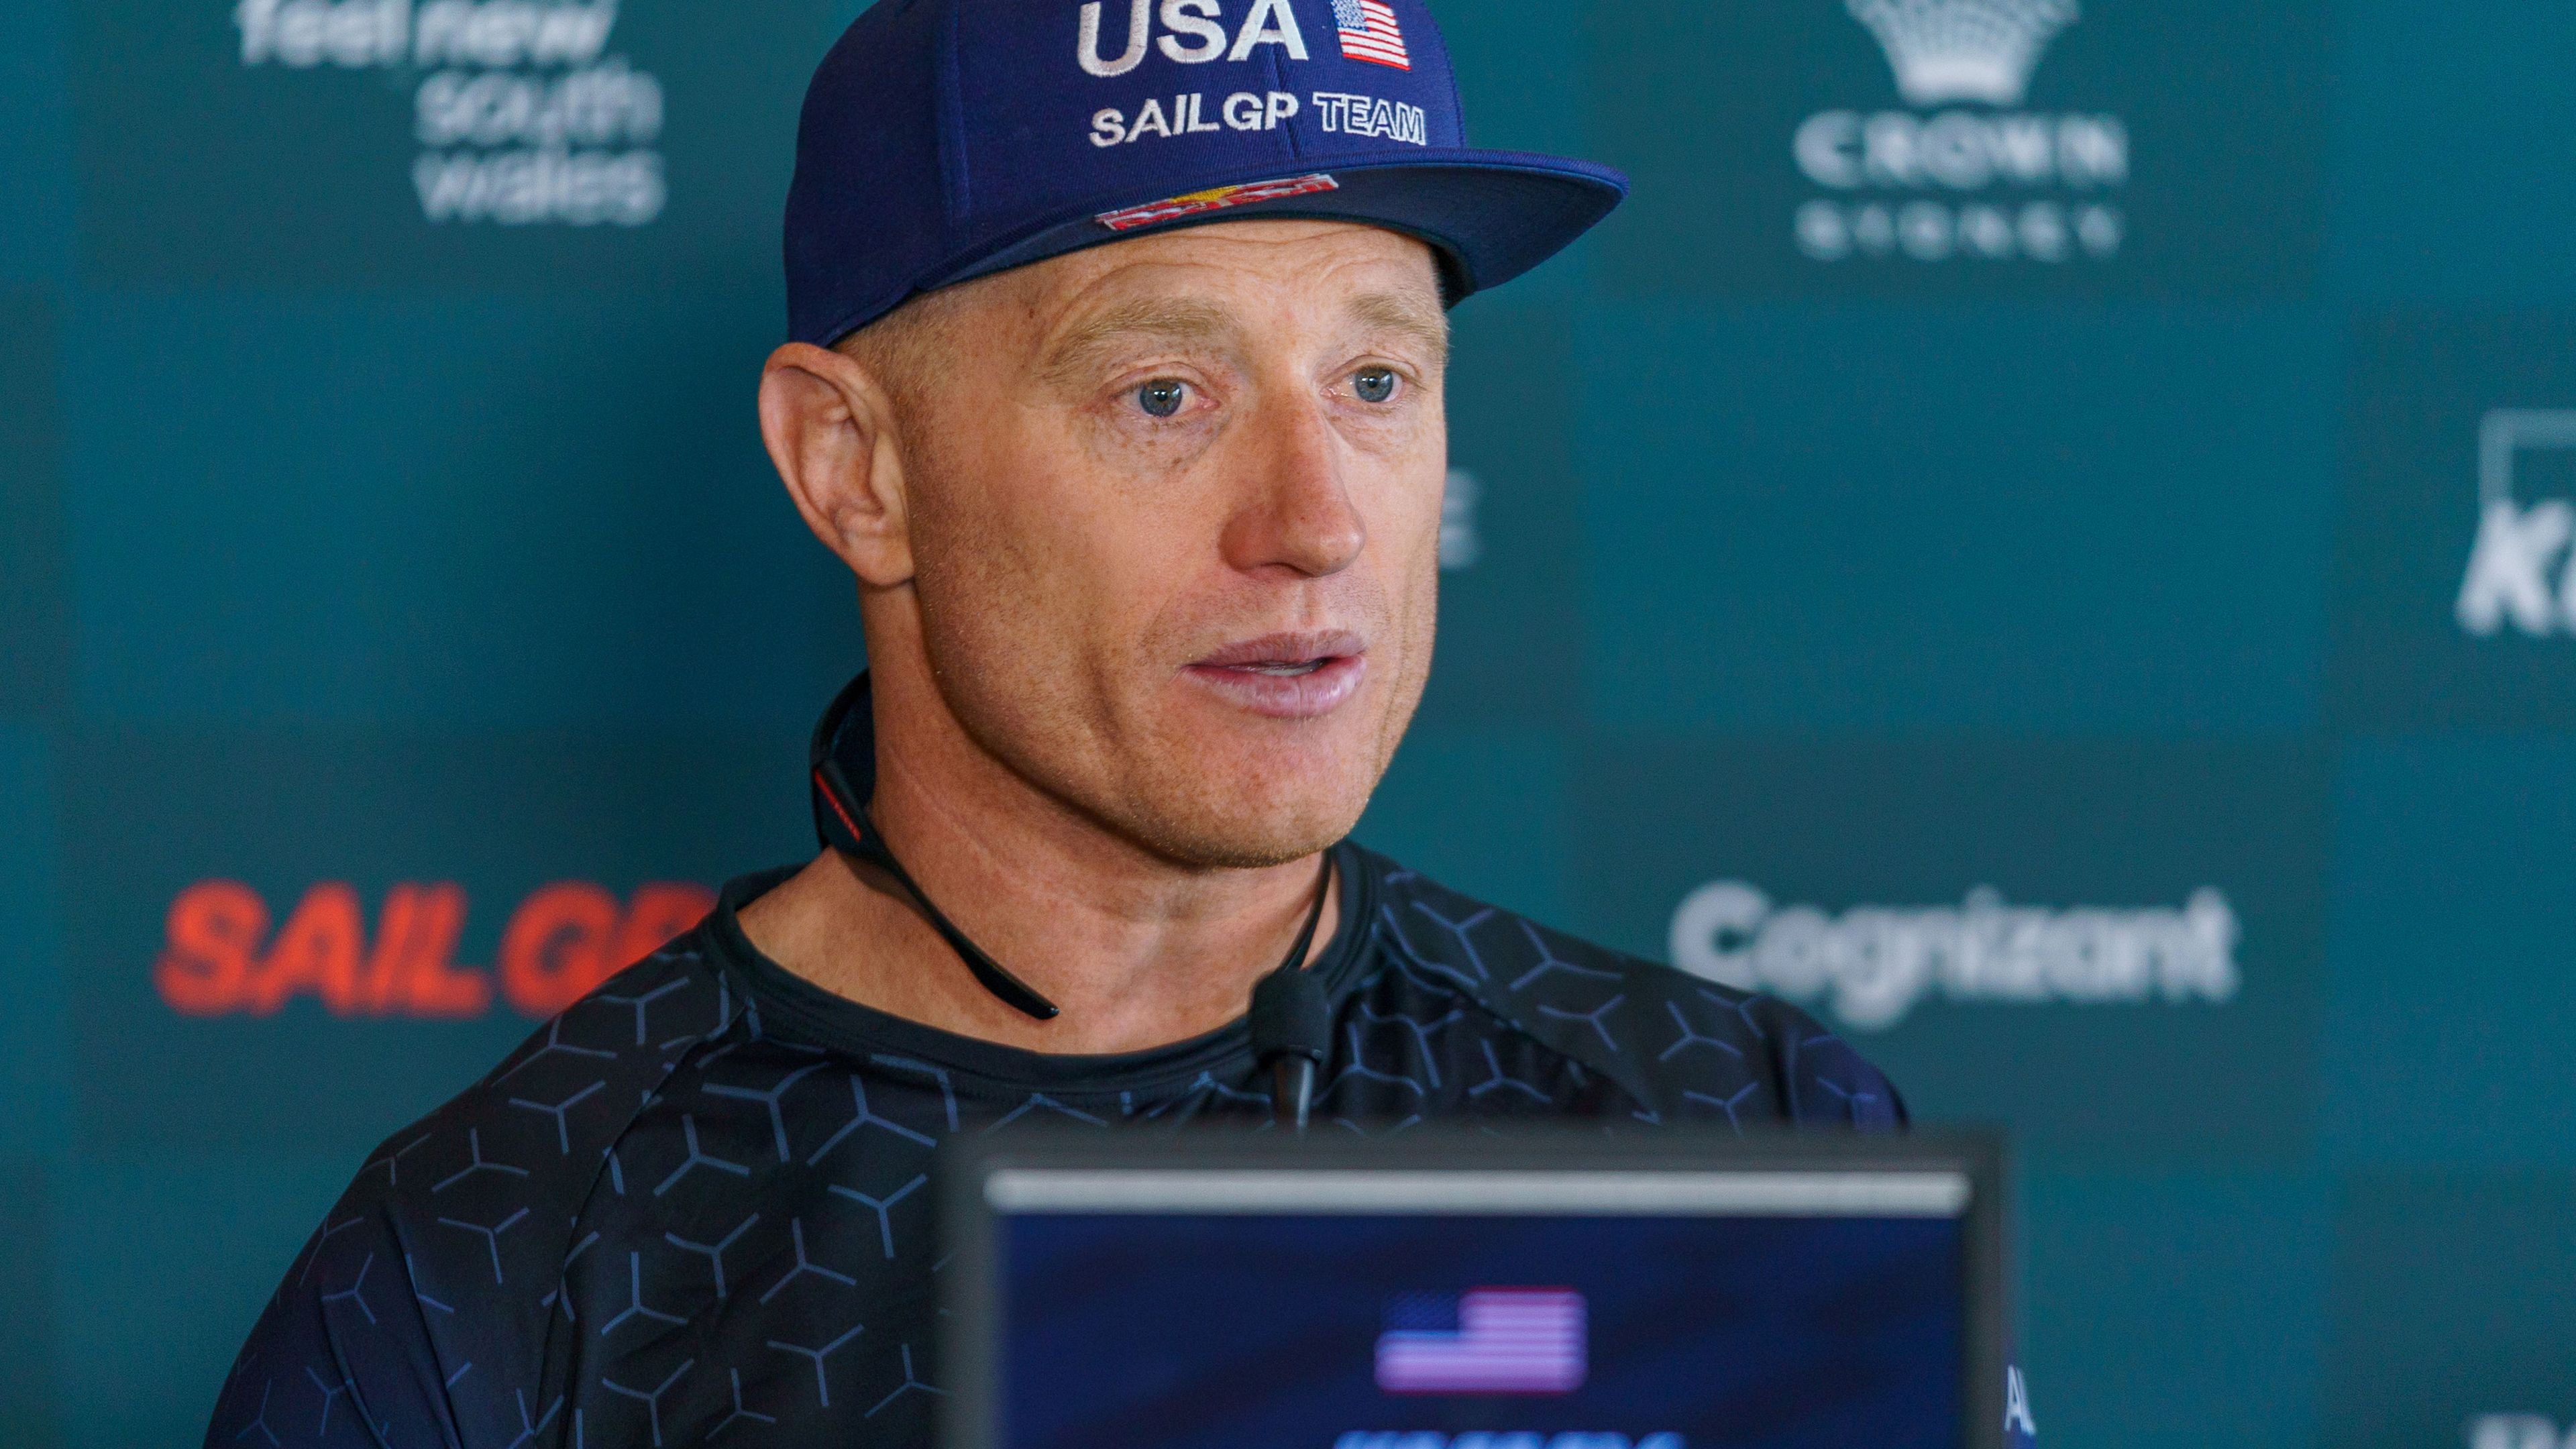 USA driver Jimmy Spithill ignites spicy Sail GP press conference with million-dollar sledge for rival